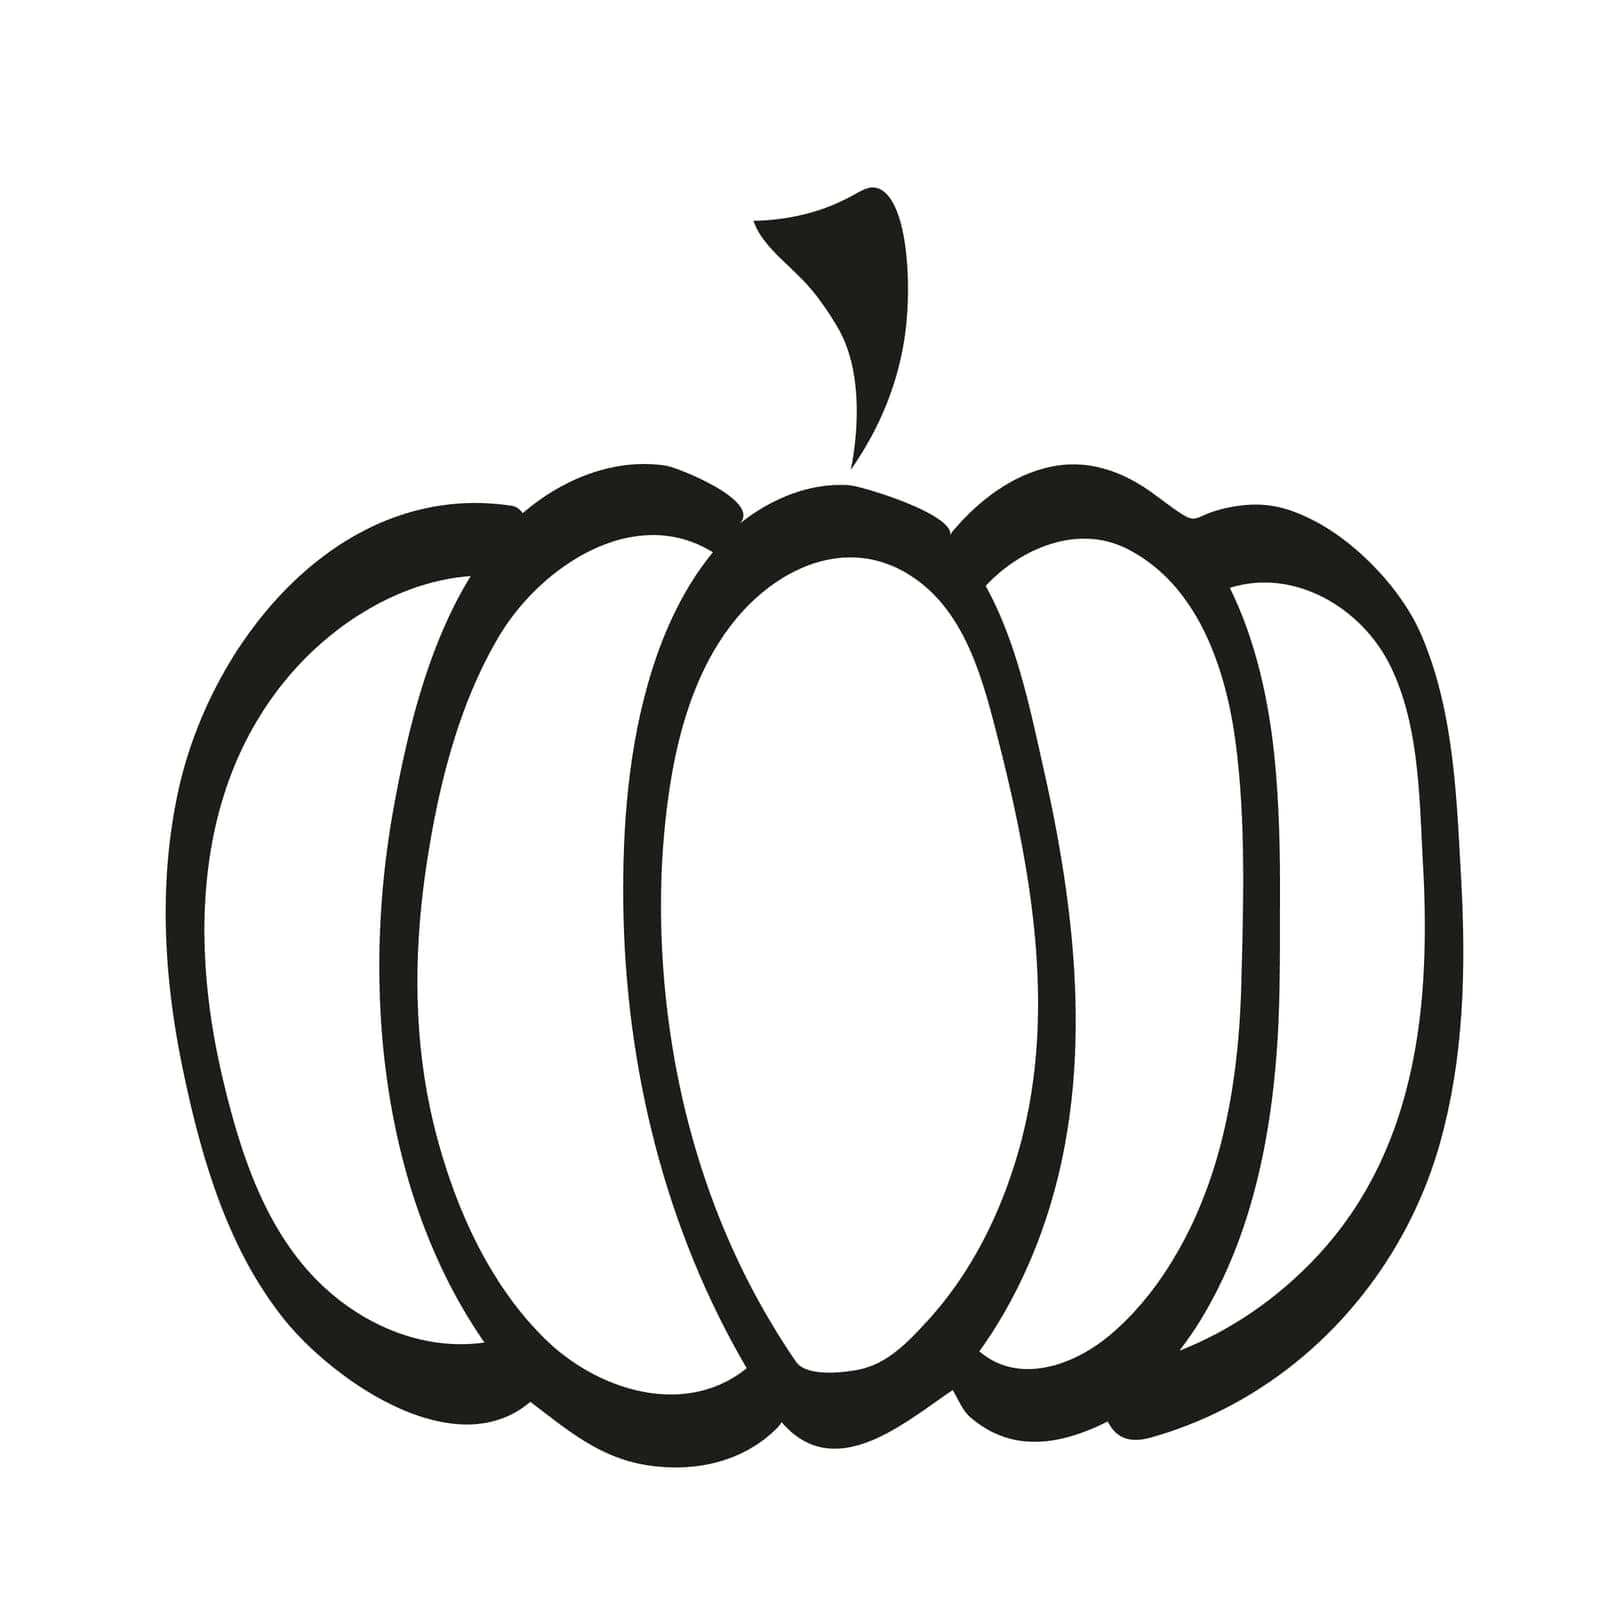 Pumpkin black ink icon for fall. Thanksgiving and Halloween Elements.Pumpkin Flat Design Vegetable Icon